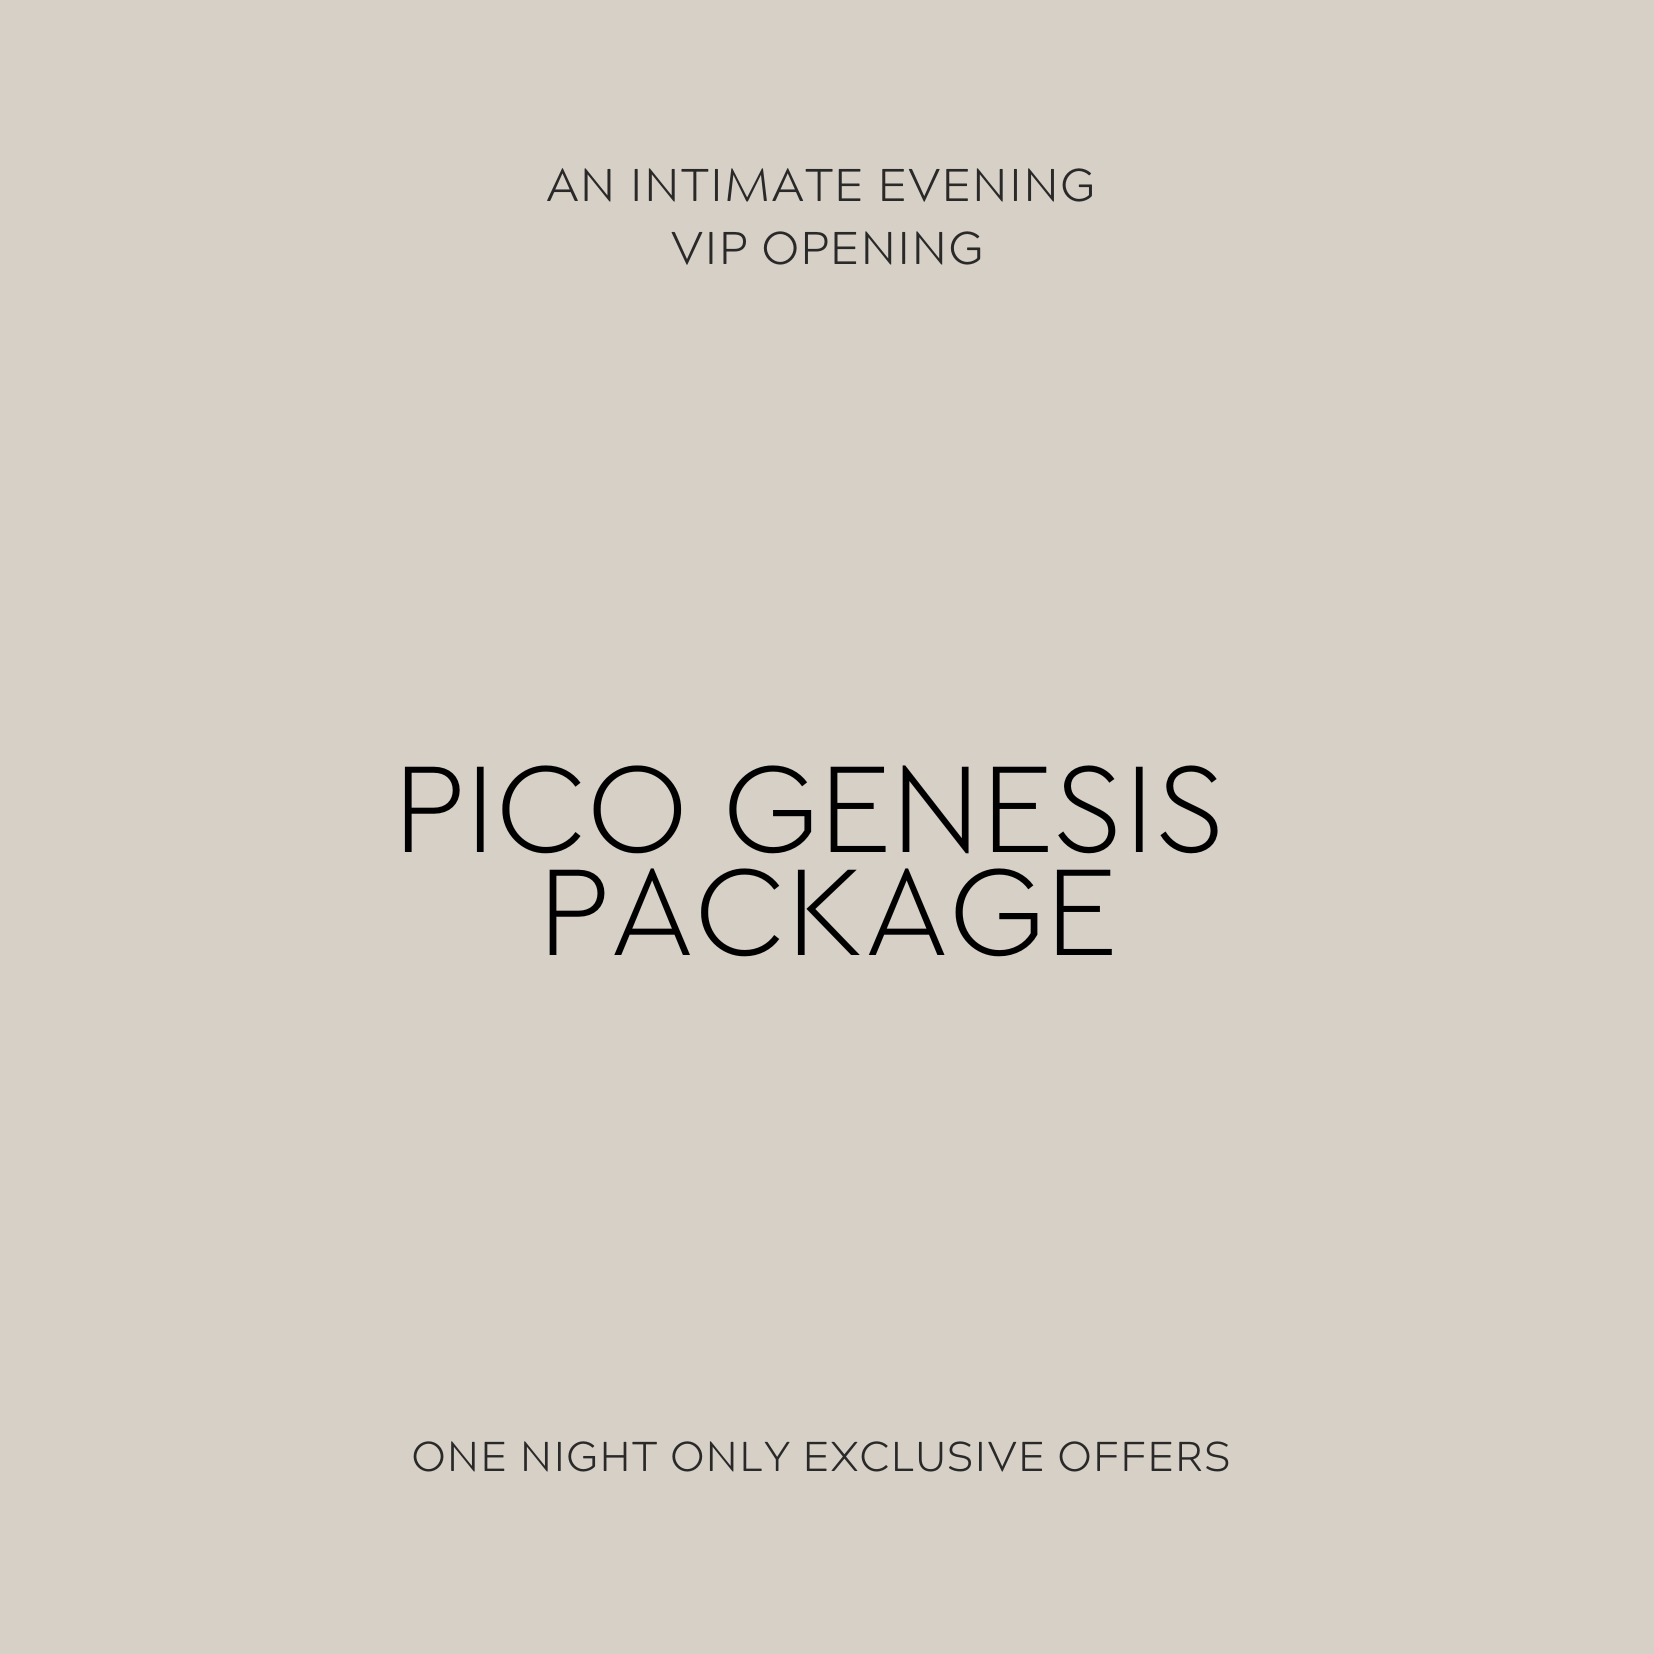 One Night Only: VIP promotions